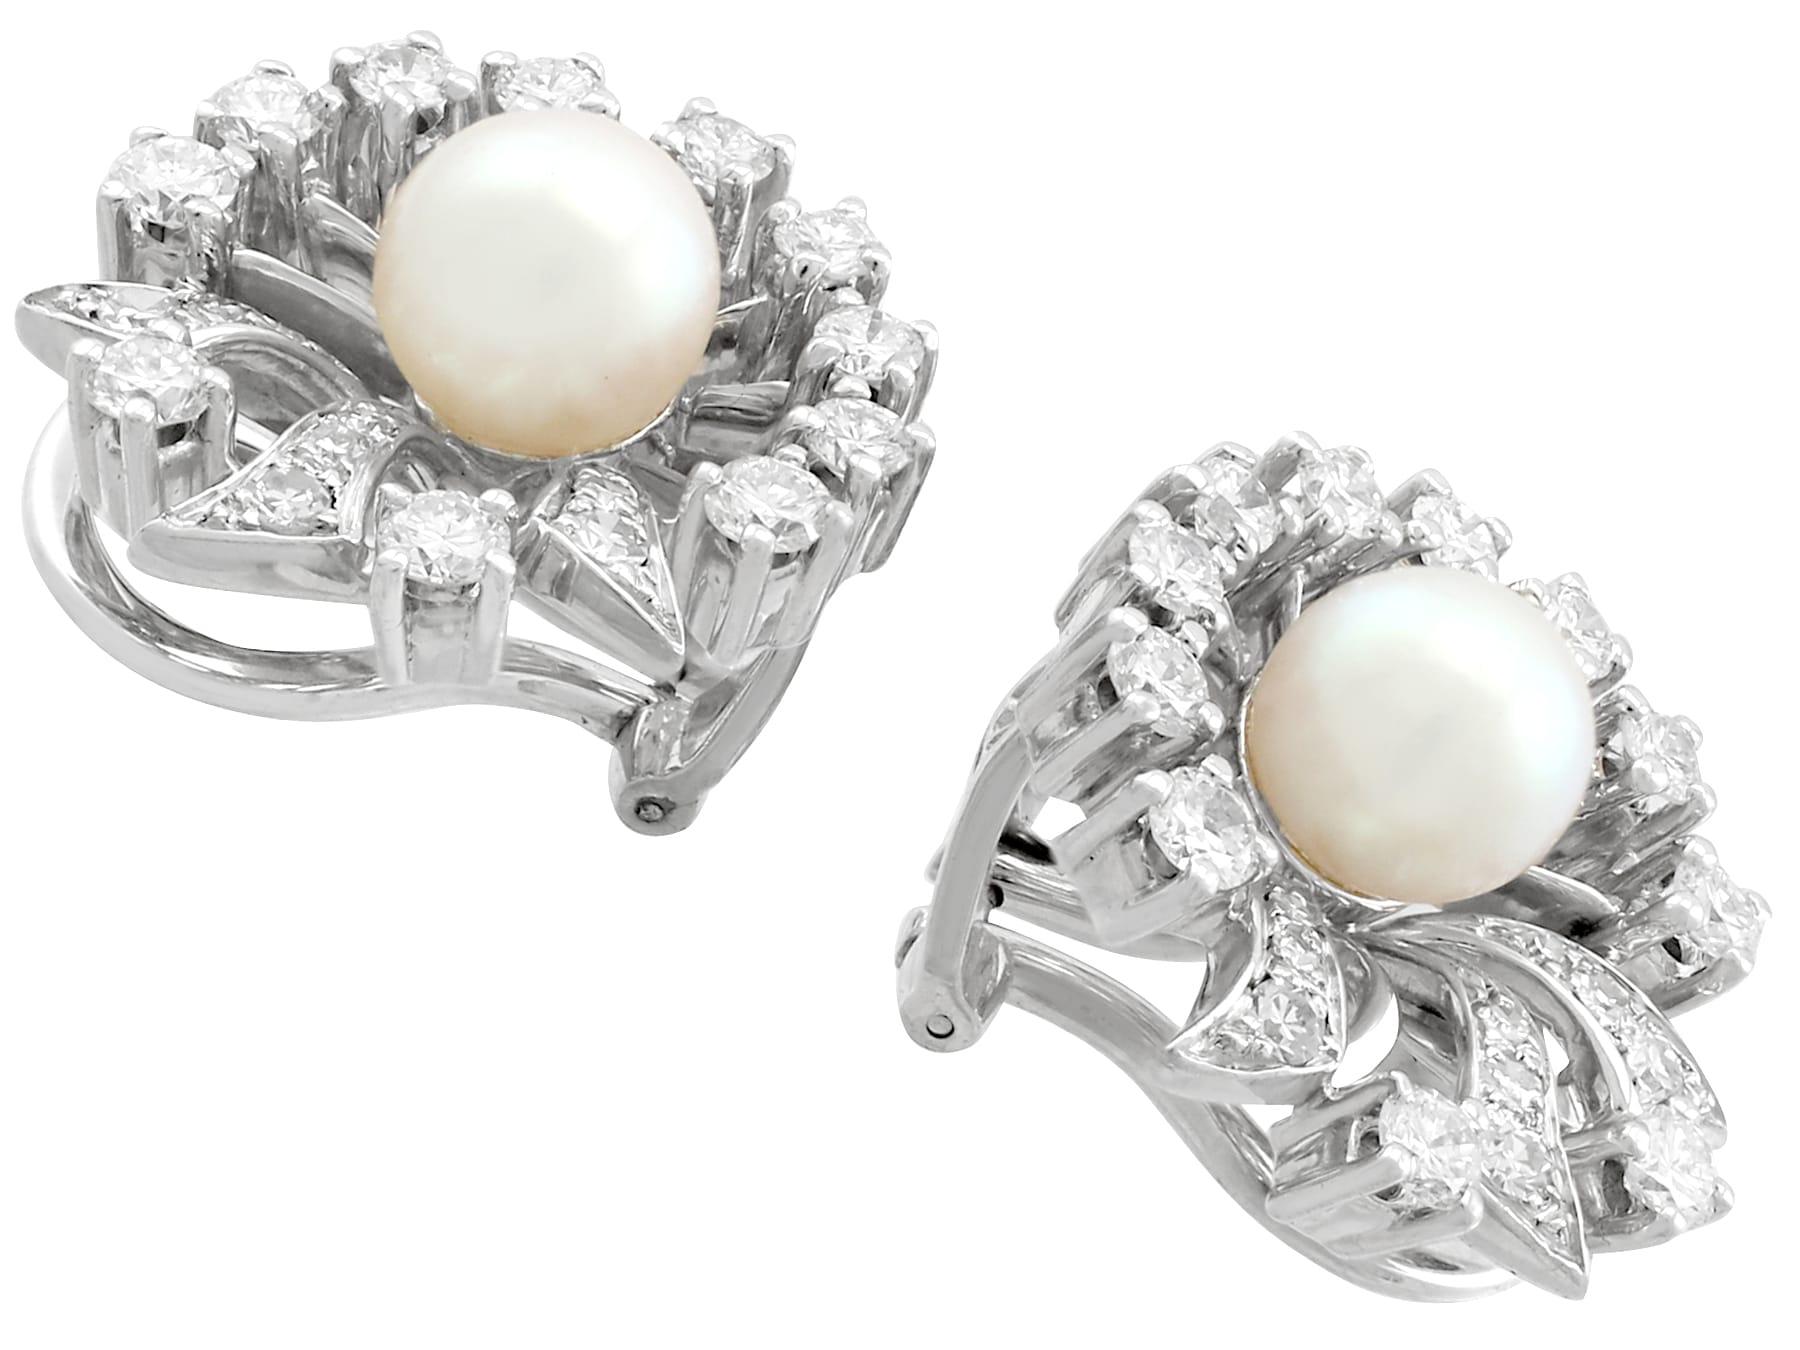 A stunning pair of cultured pearl and 1.22 carat diamond, 18 karat white gold clip on earrings; part of our diverse vintage jewelry and estate jewelry collections

These stunning, fine and impressive vintage clip one pearl earrings have been crafted